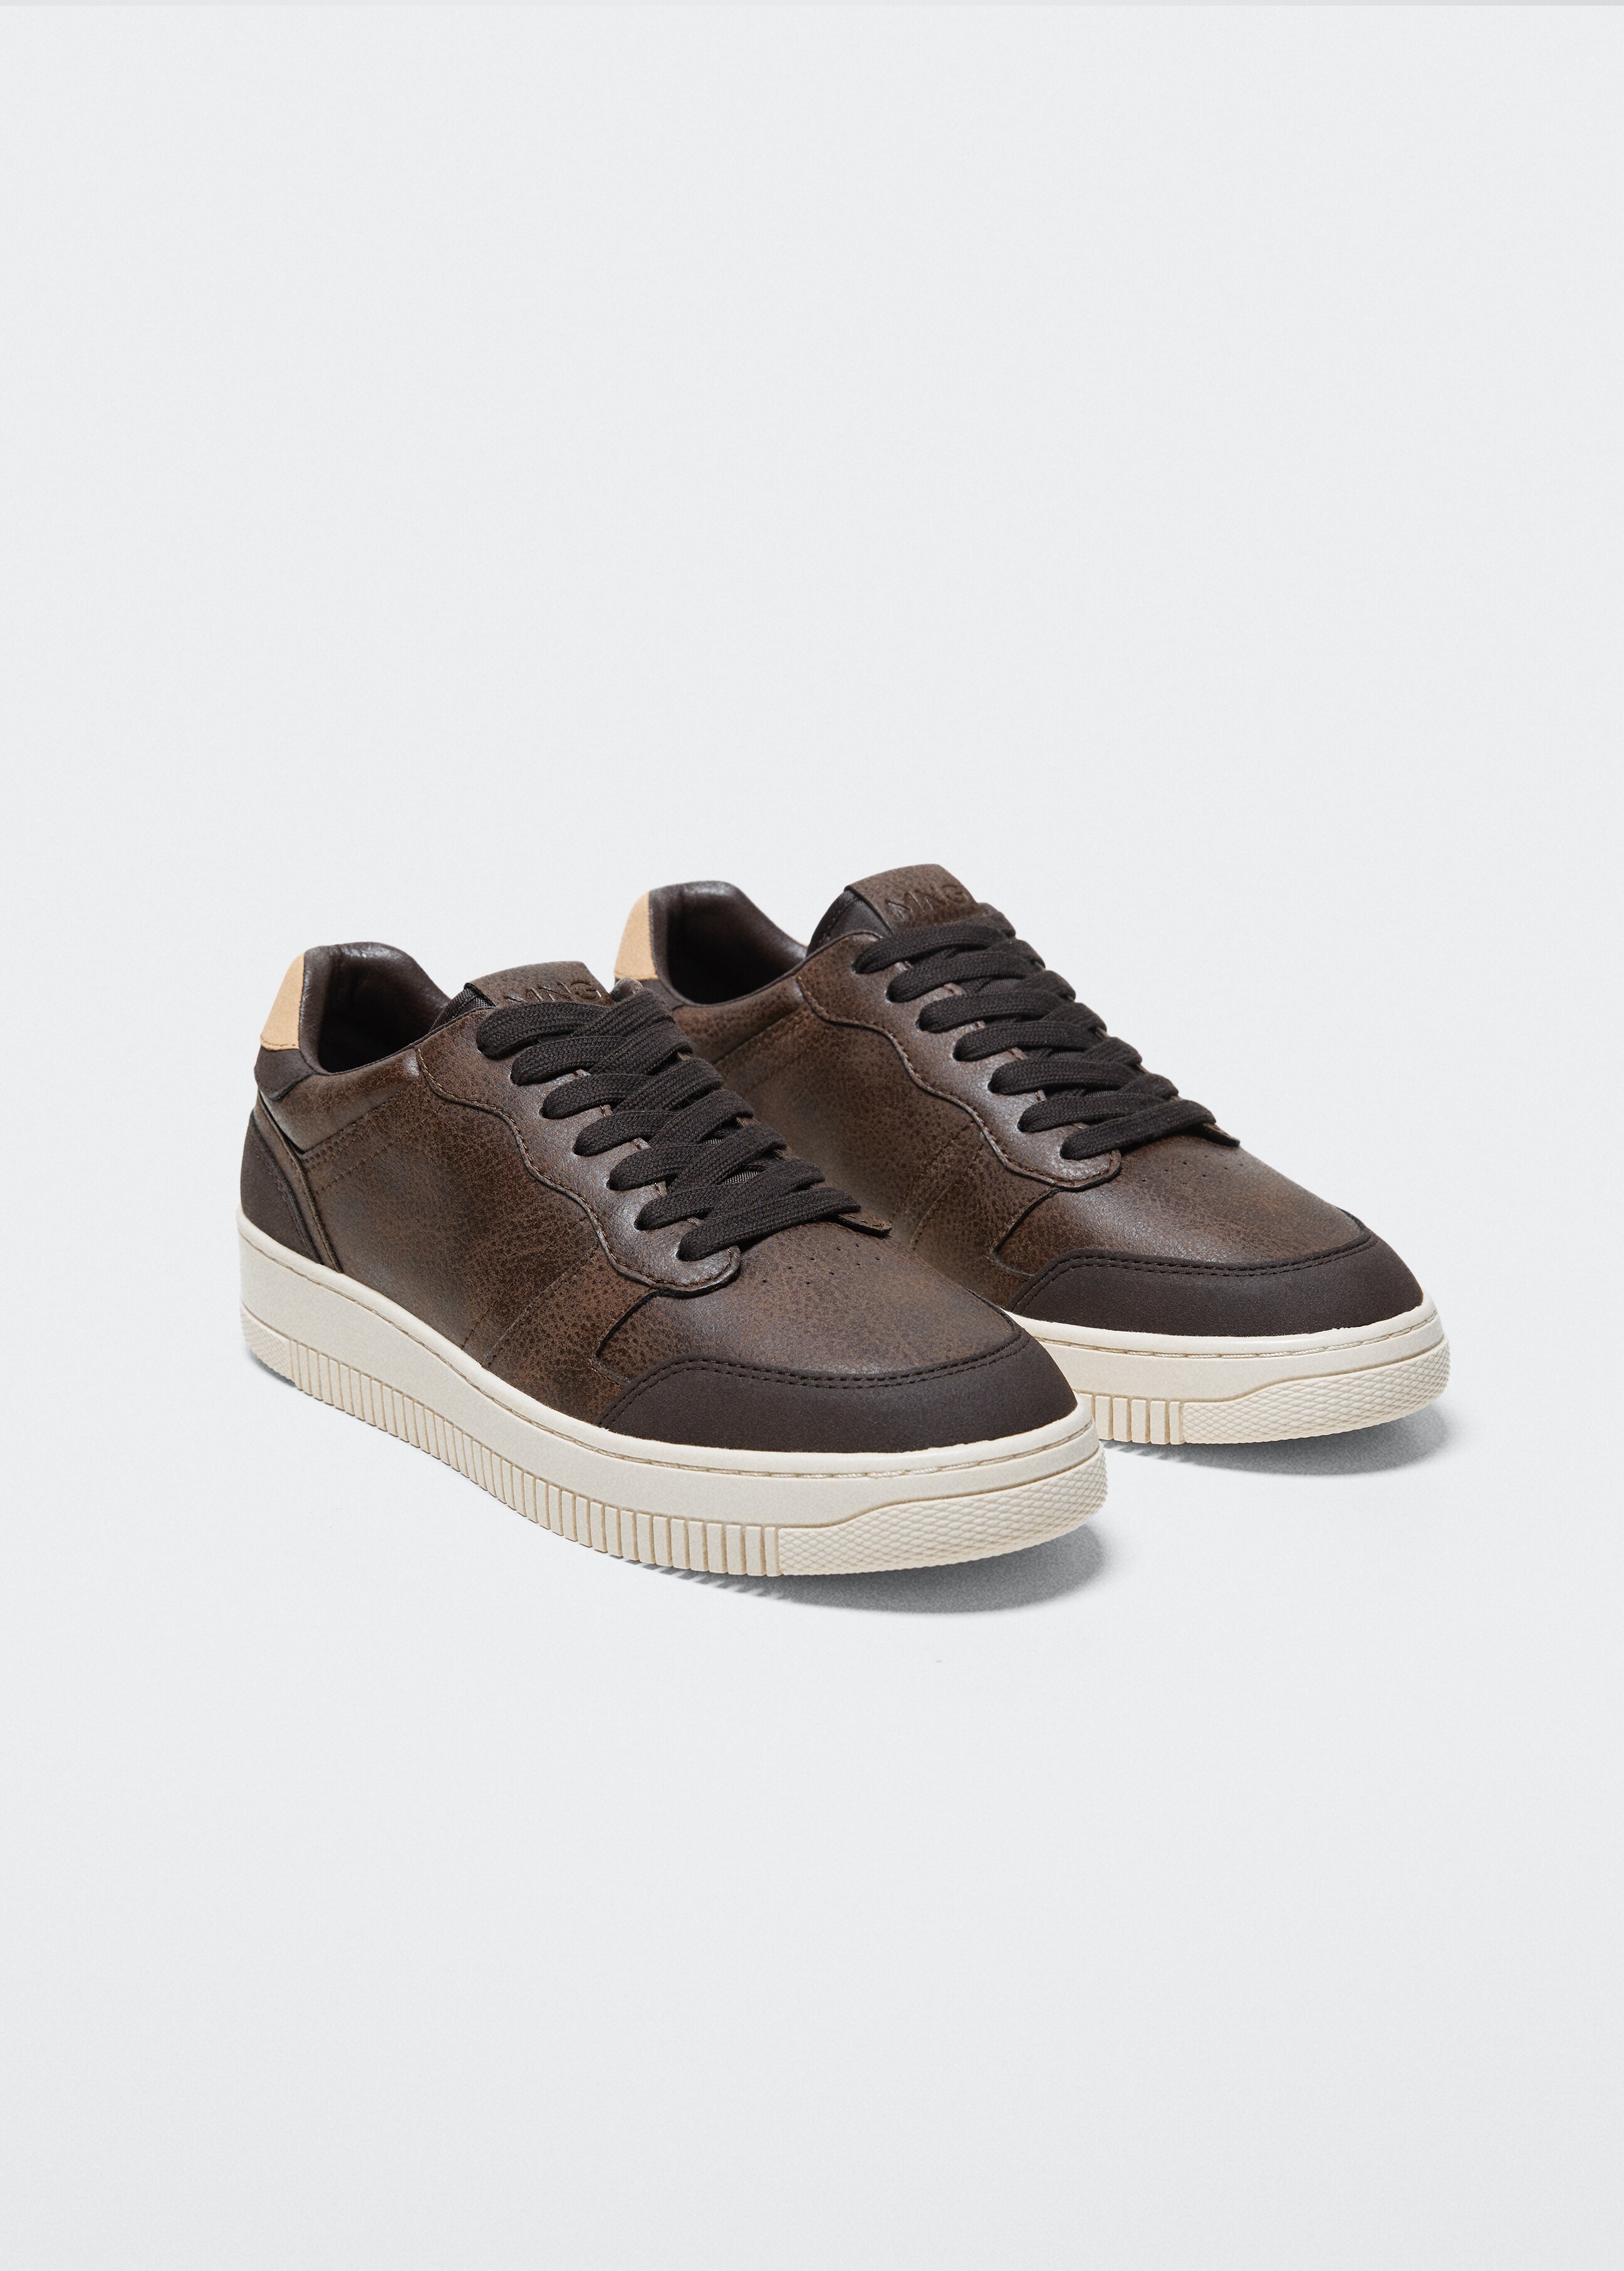 Faux-leather sneakers - Medium plane